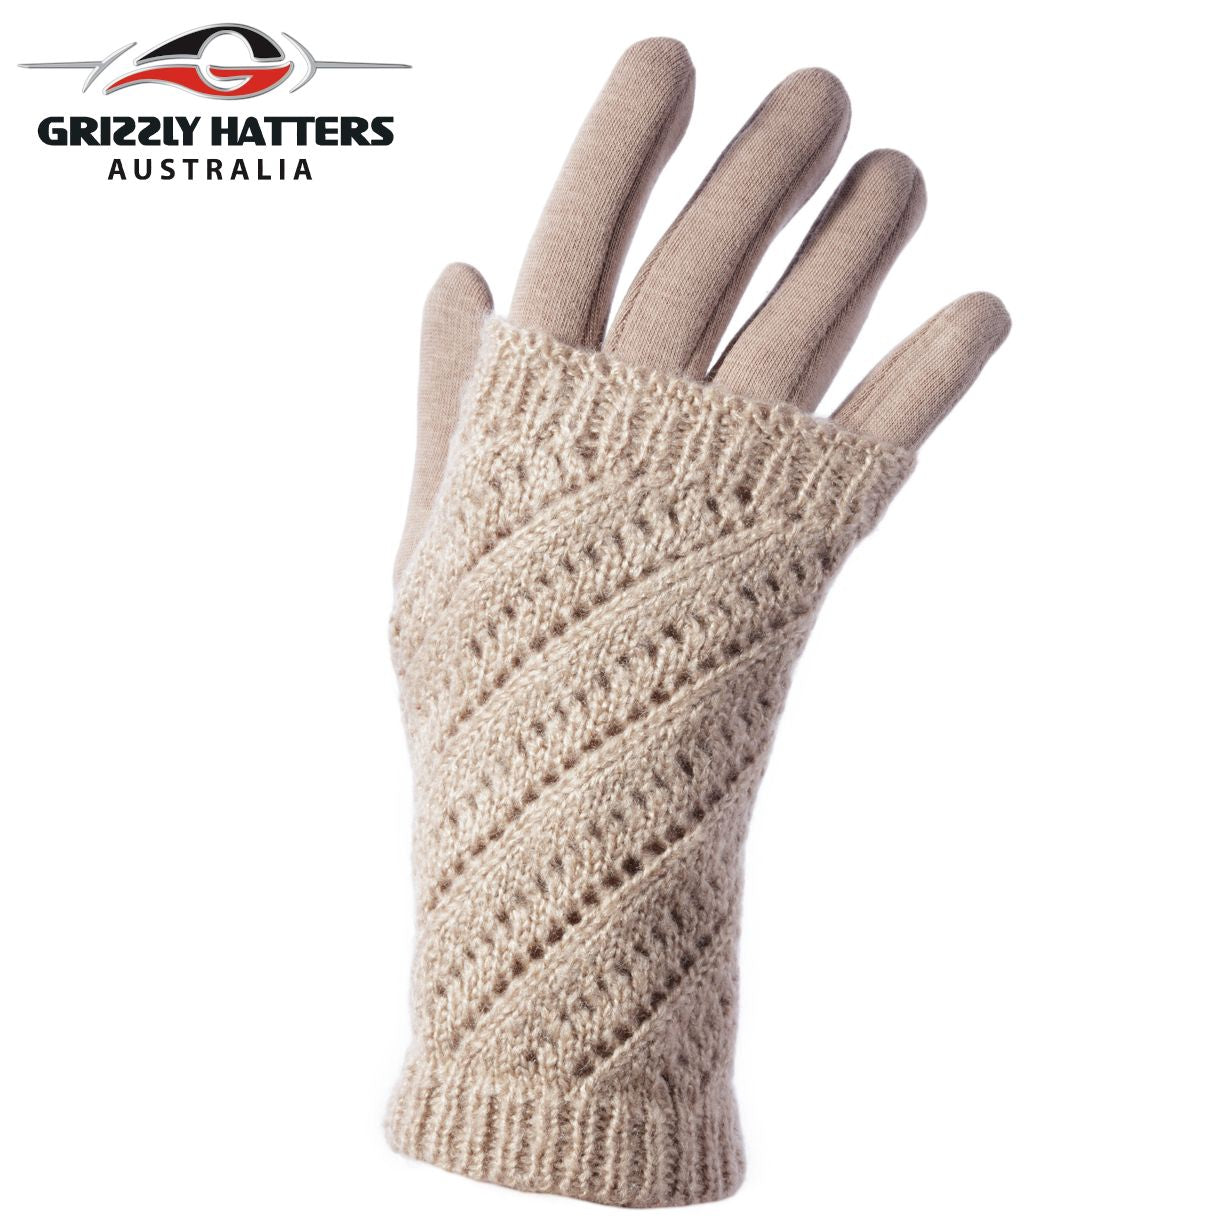 Two-in-one design warm winter gloves in beige colour  with fleece lining; glove with mitten design; designed by Grizzly Hatters Australia Tasmania Salamanca Market